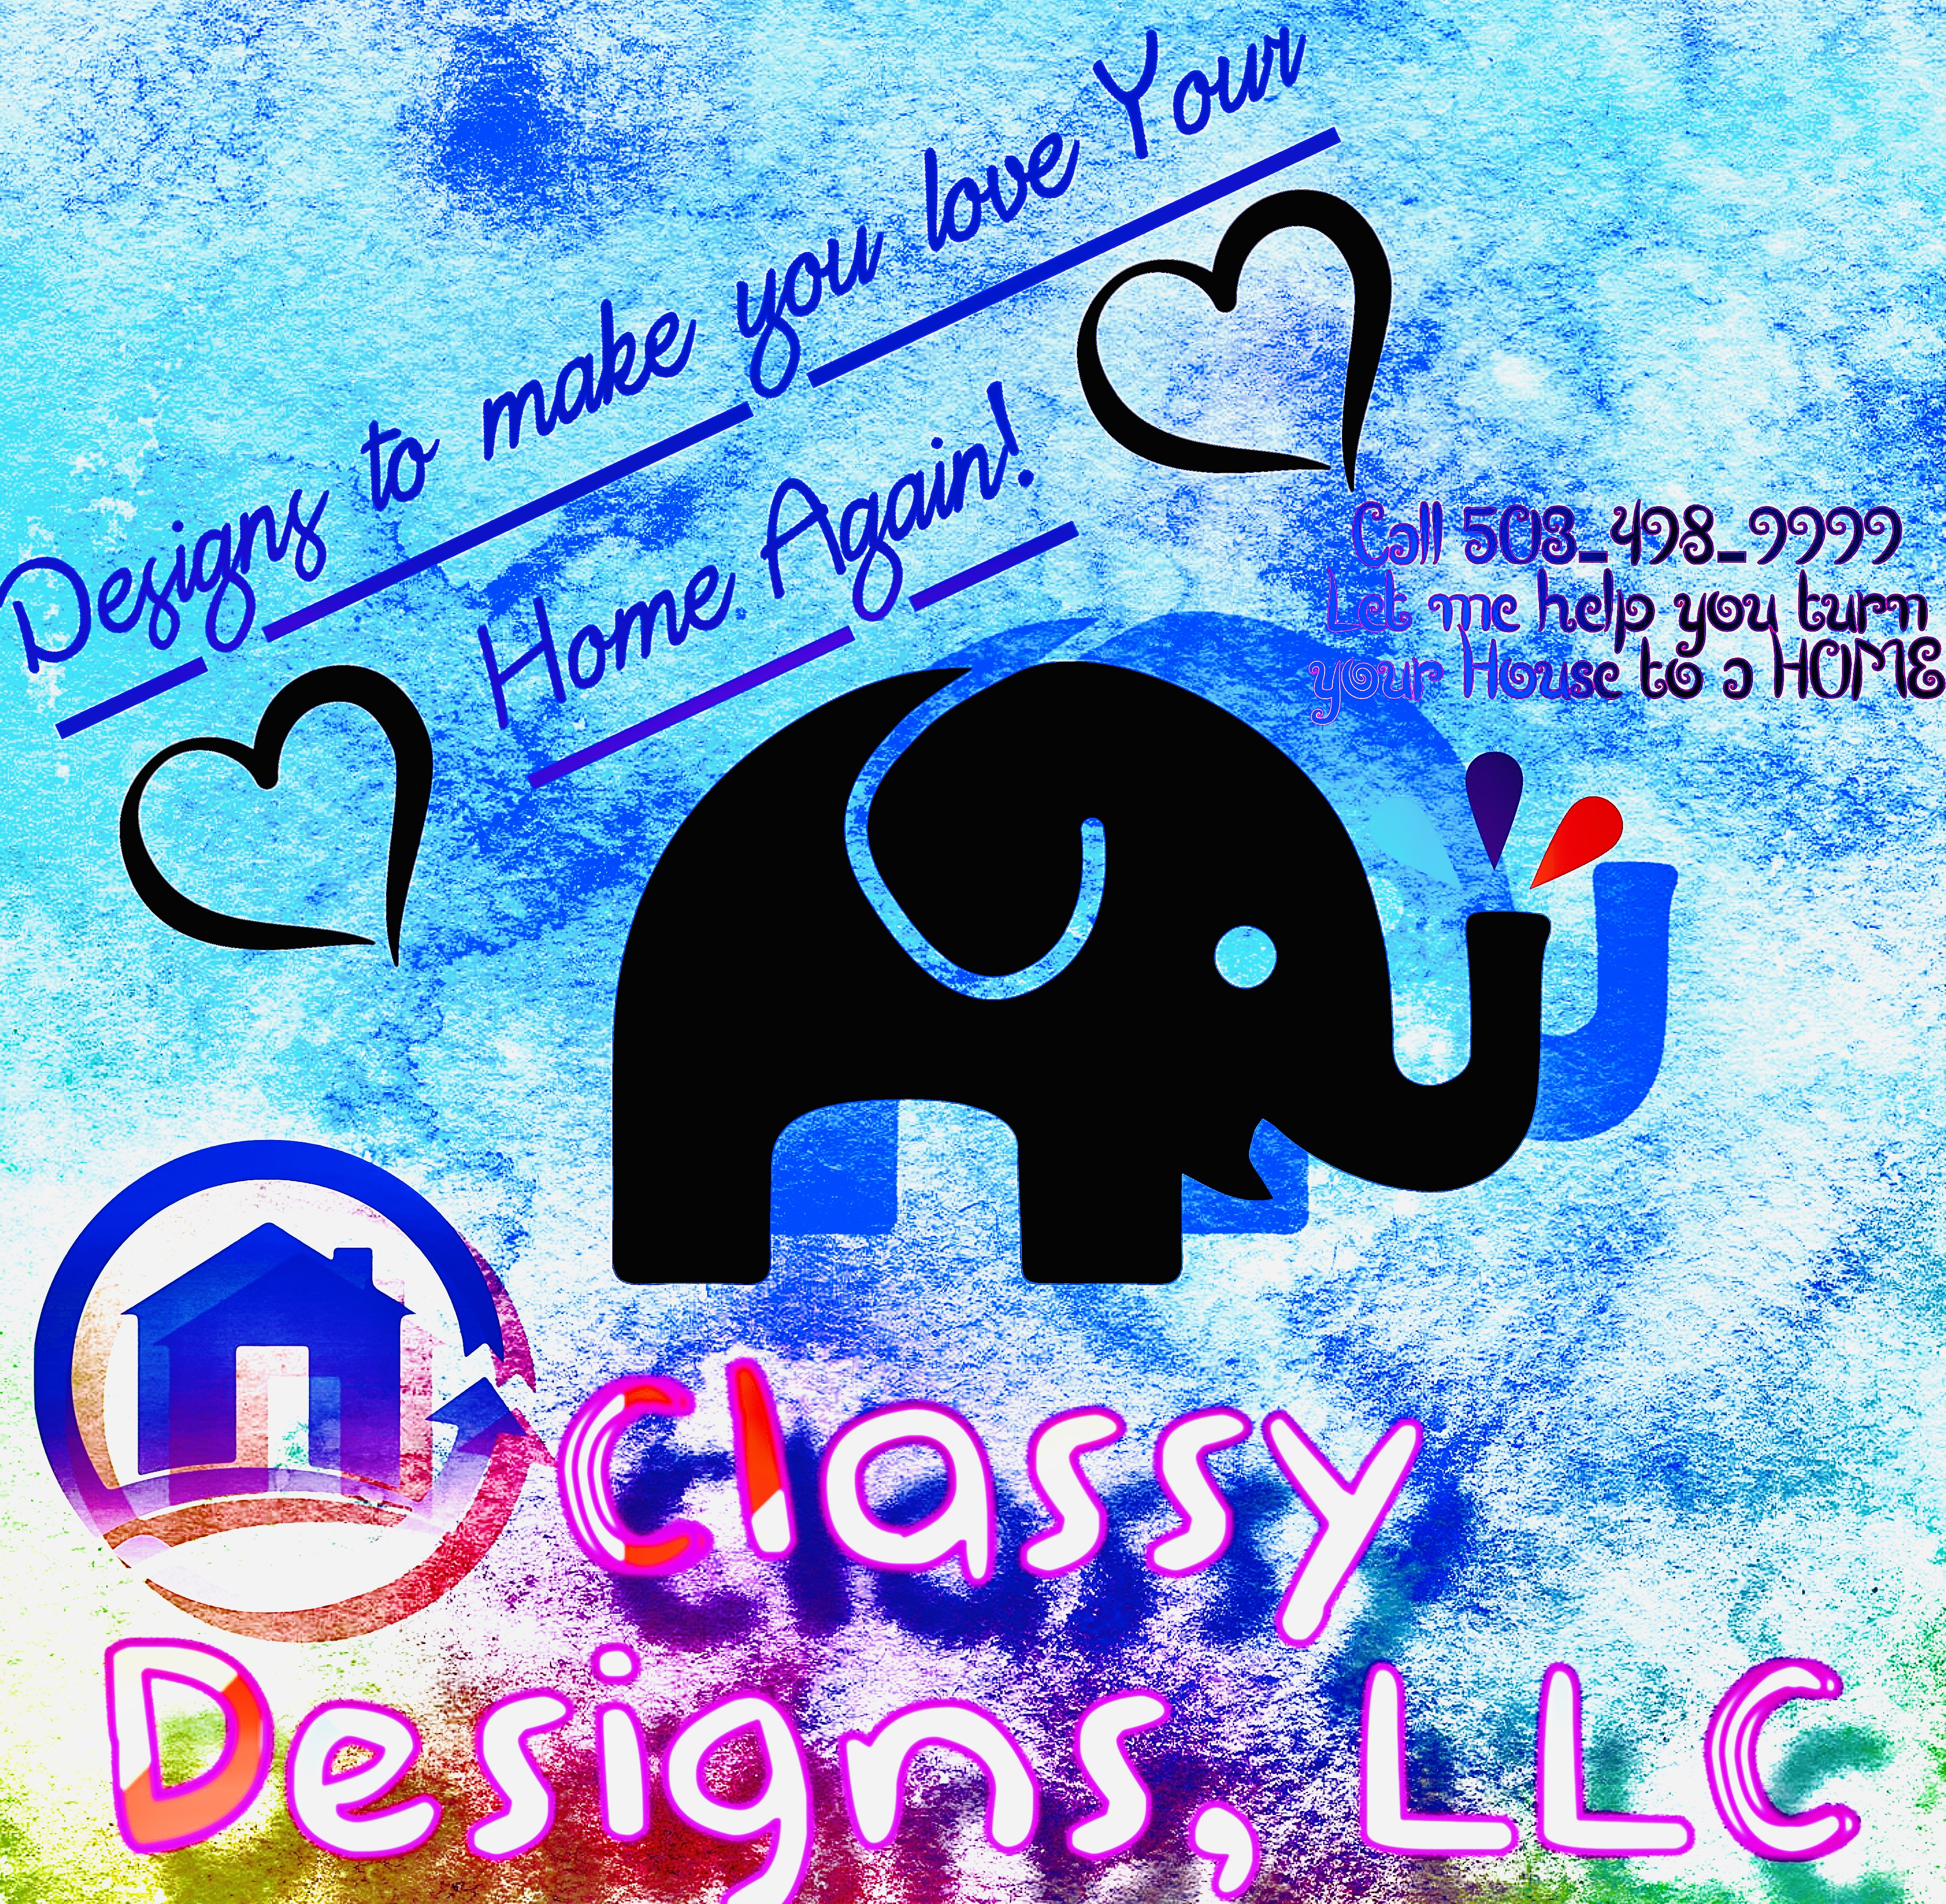 Classy Designs – Designs for every style of home!